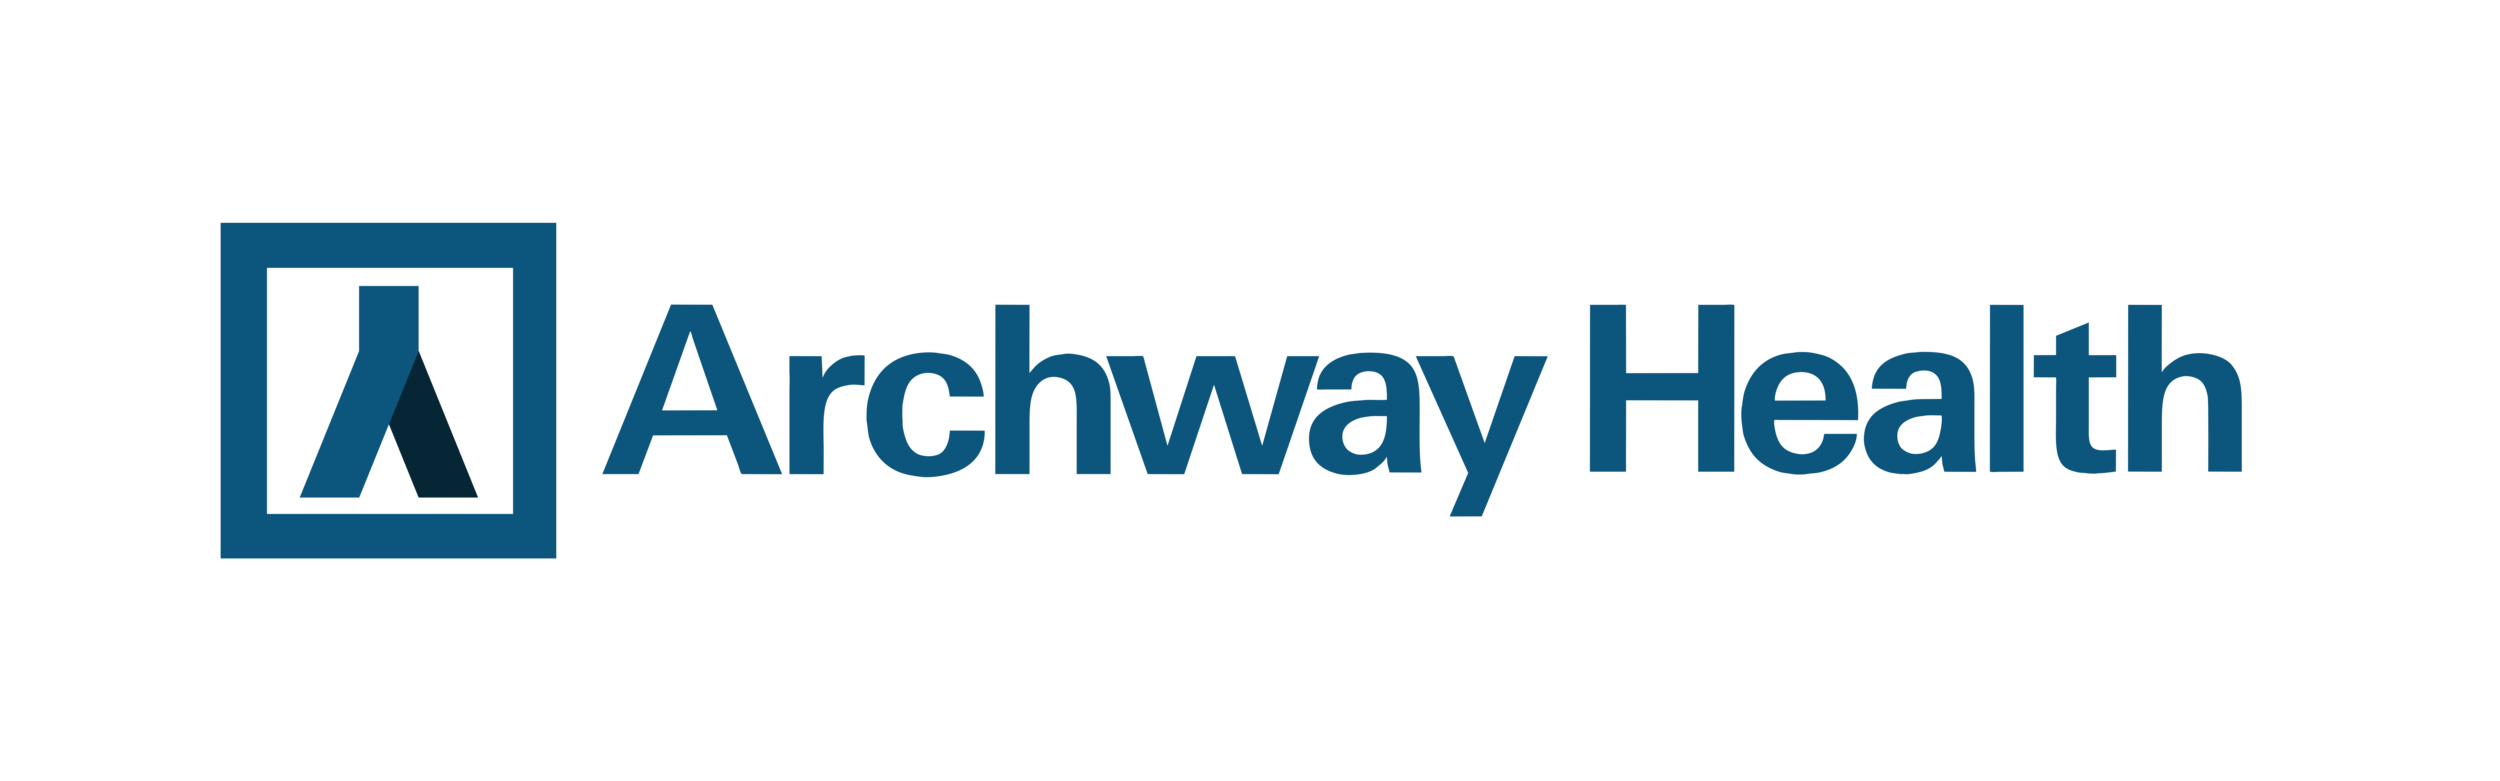 Archway Logo - Archway Health: New Name and Logo